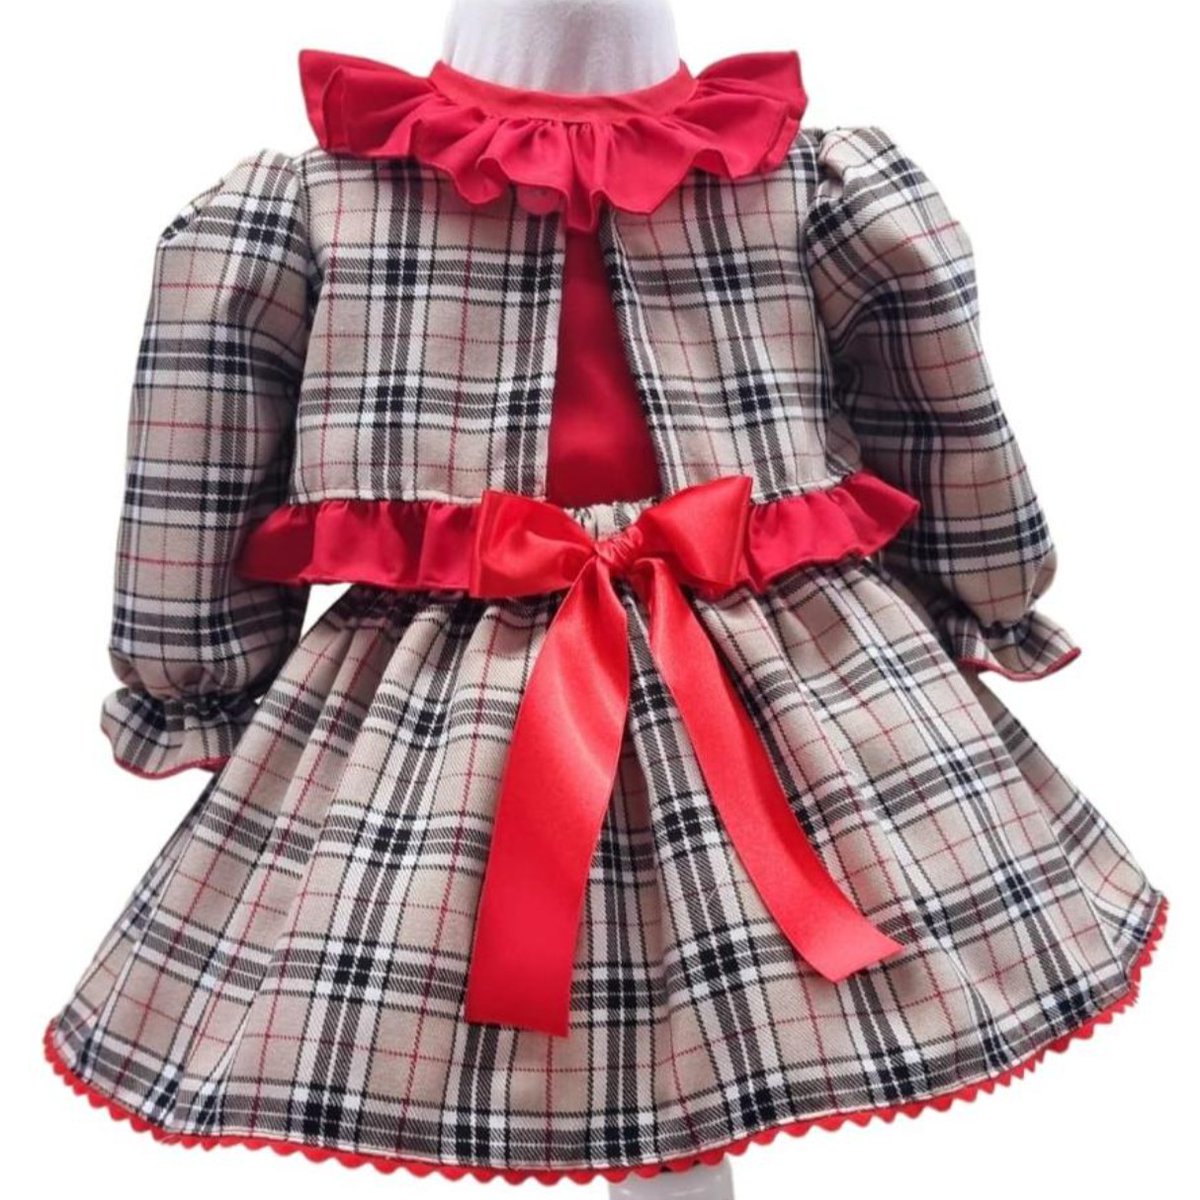 How gorgeous are these Christmas outfits from Enchanted Gifts and Crafts?